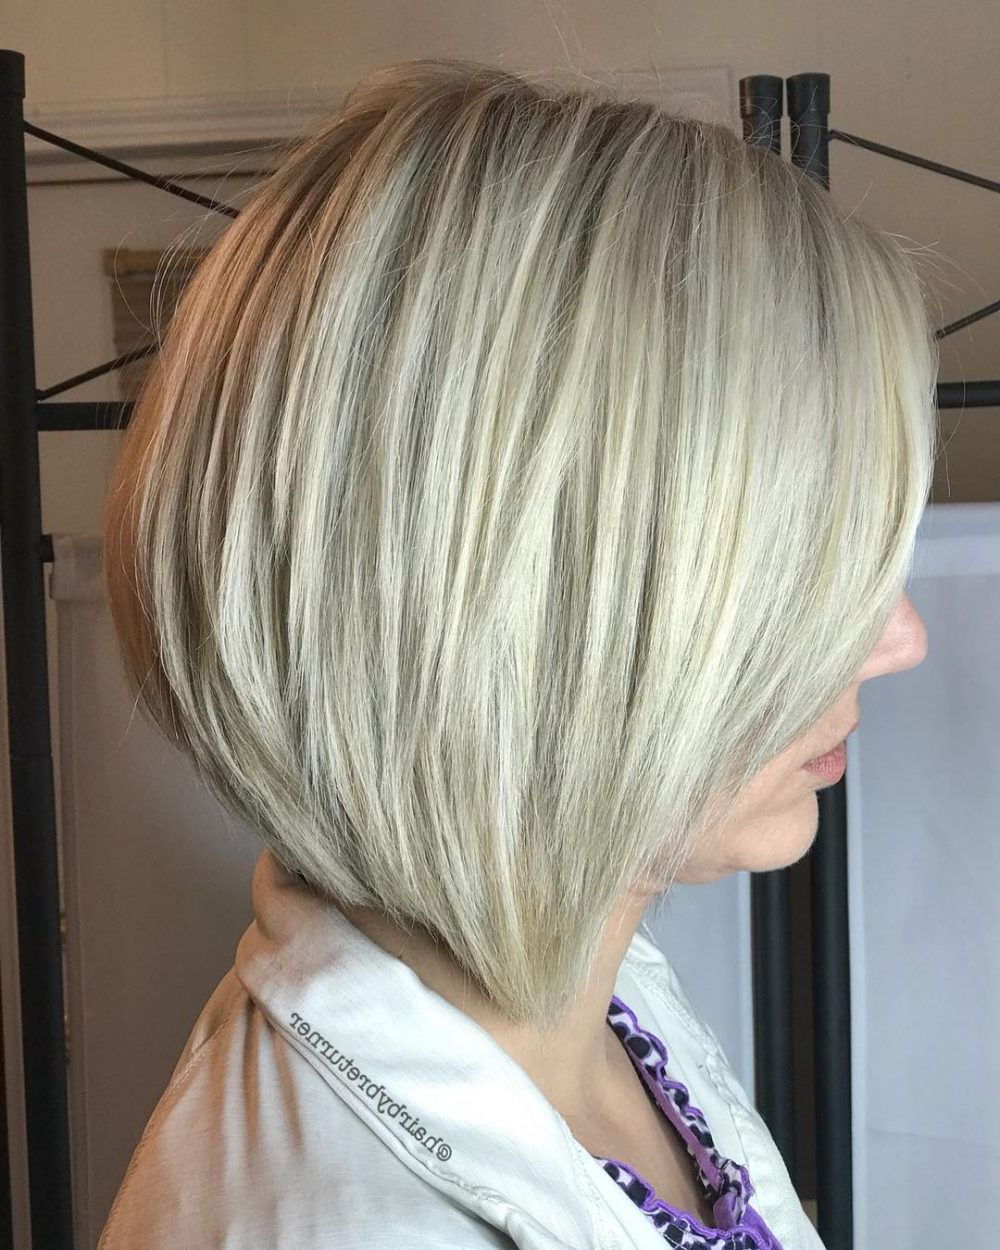 42 Sexiest Short Hairstyles For Women Over 40 In 2018 For Short Hairstyles For Women Over 40 With Fine Hair (Photo 8 of 25)